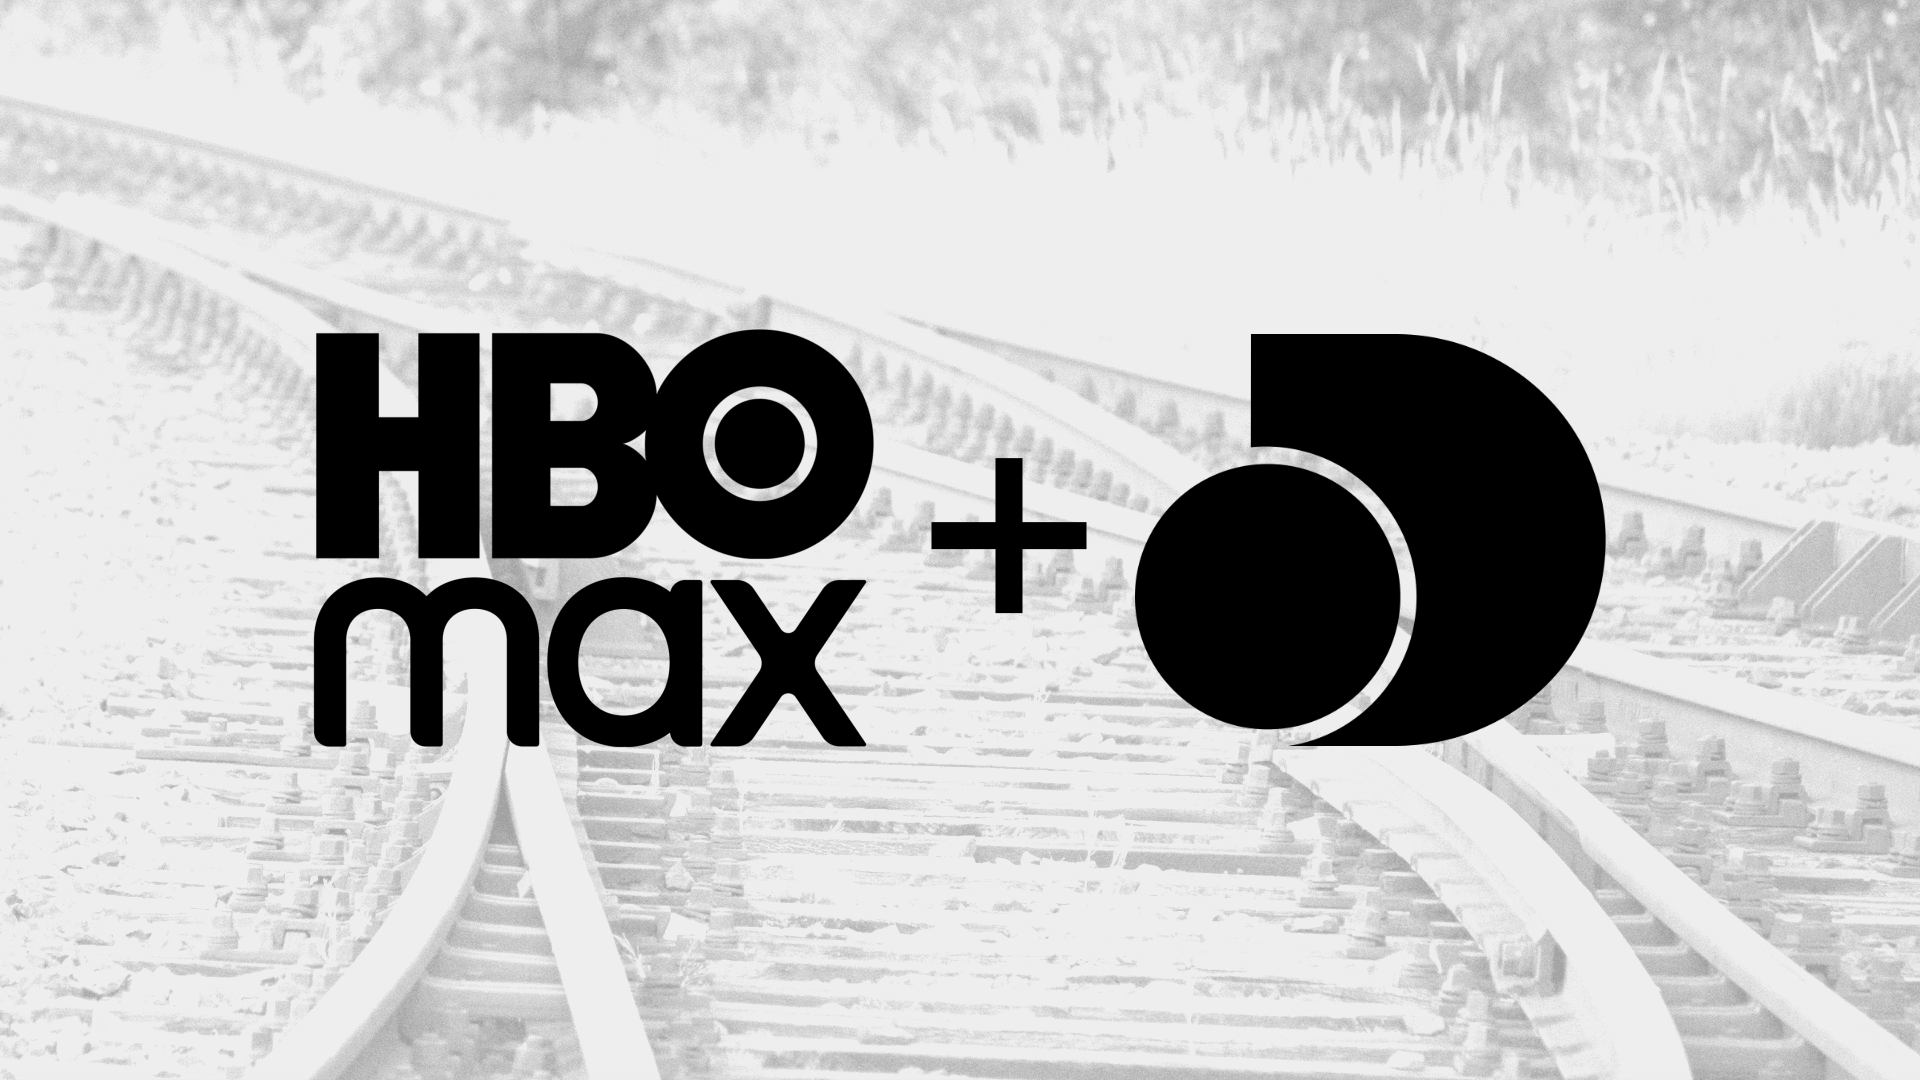 hbo-max-discovery-plus-hero